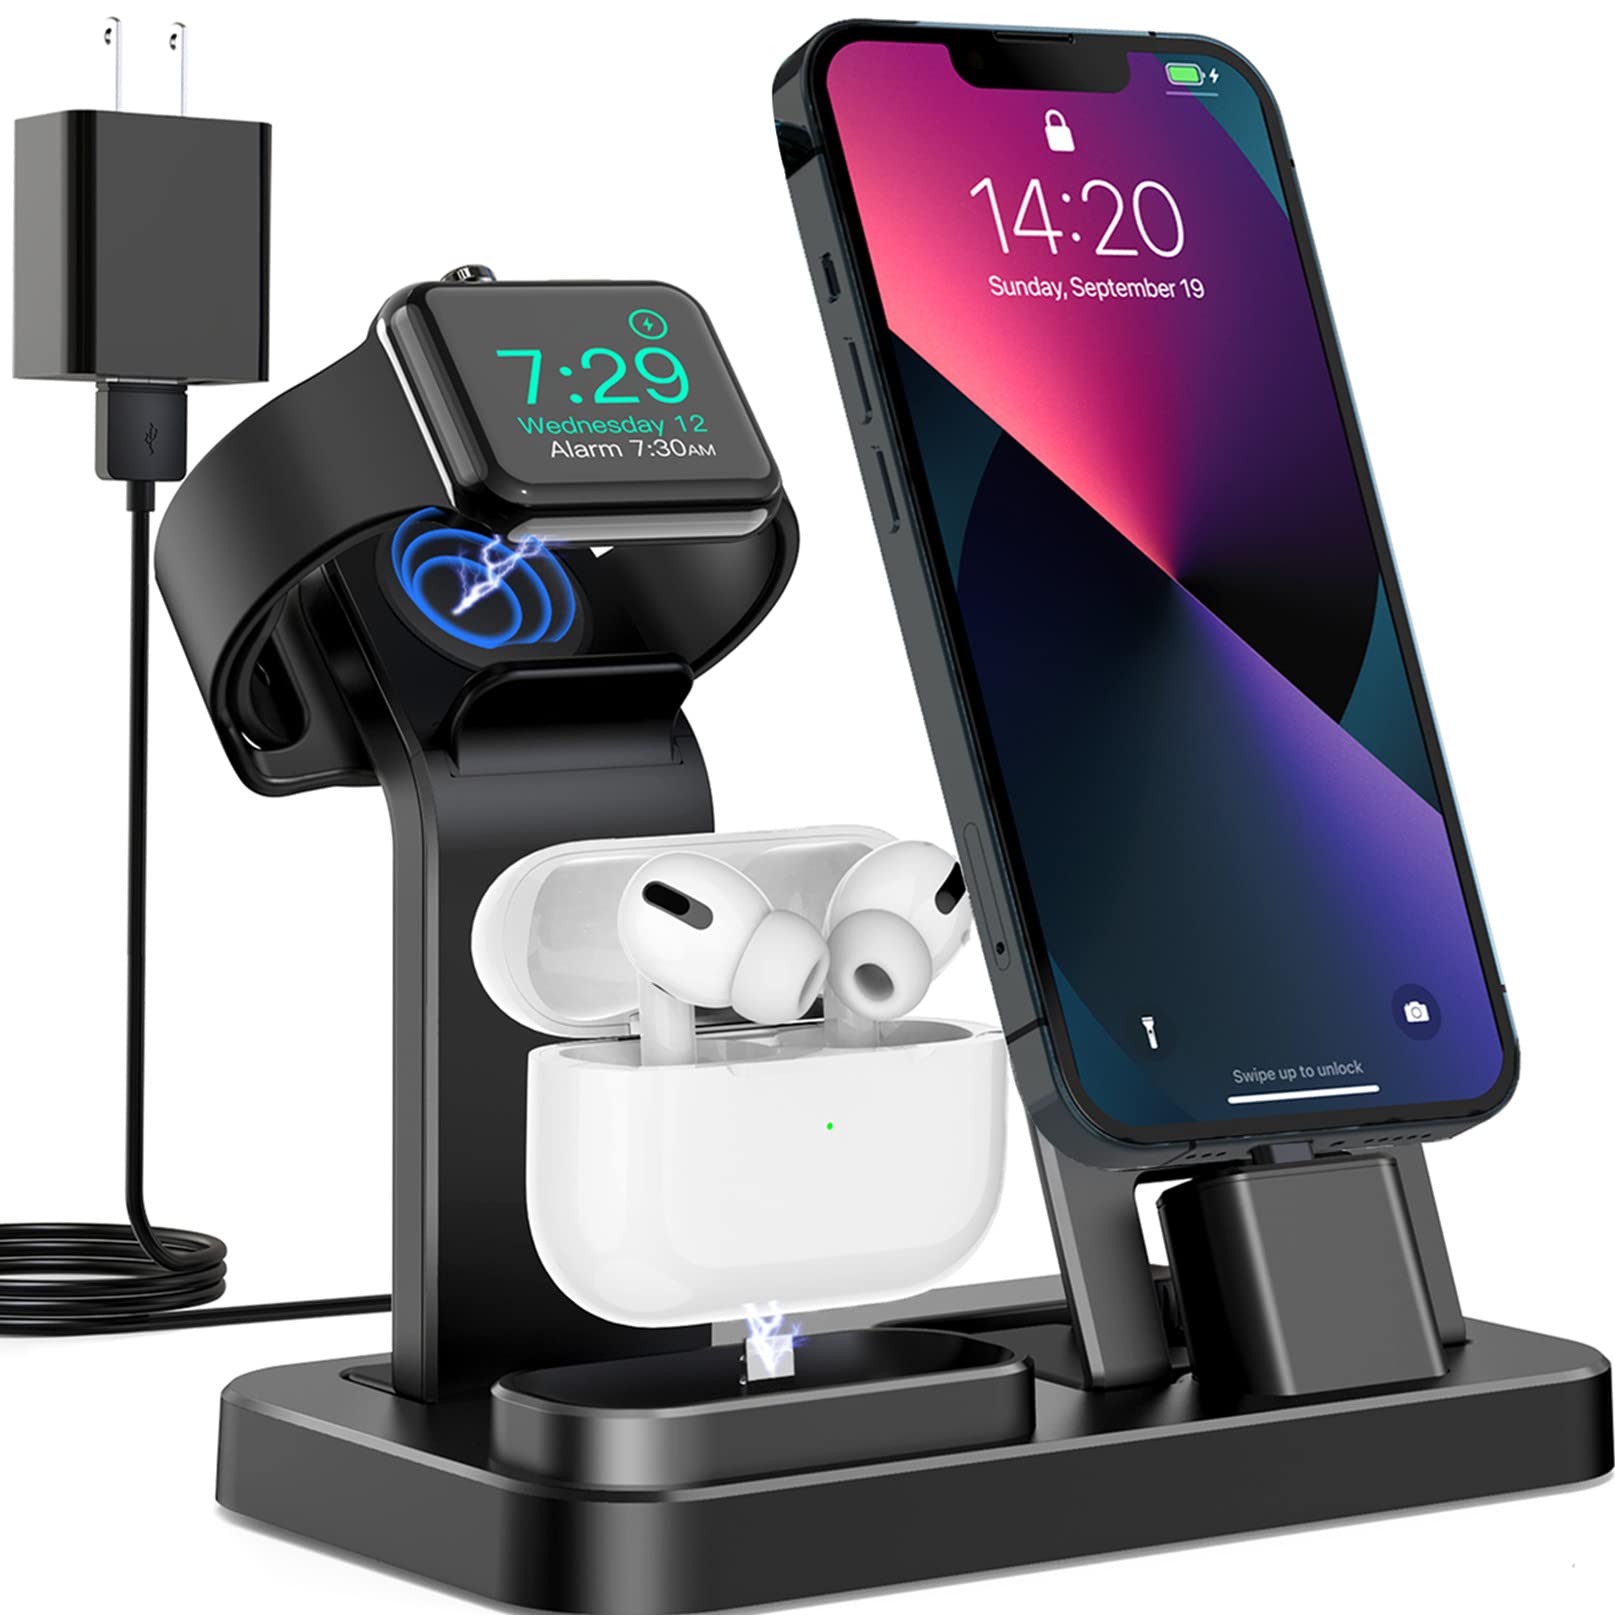 Boyfriend Christmas Gifts - Charging Stand Station